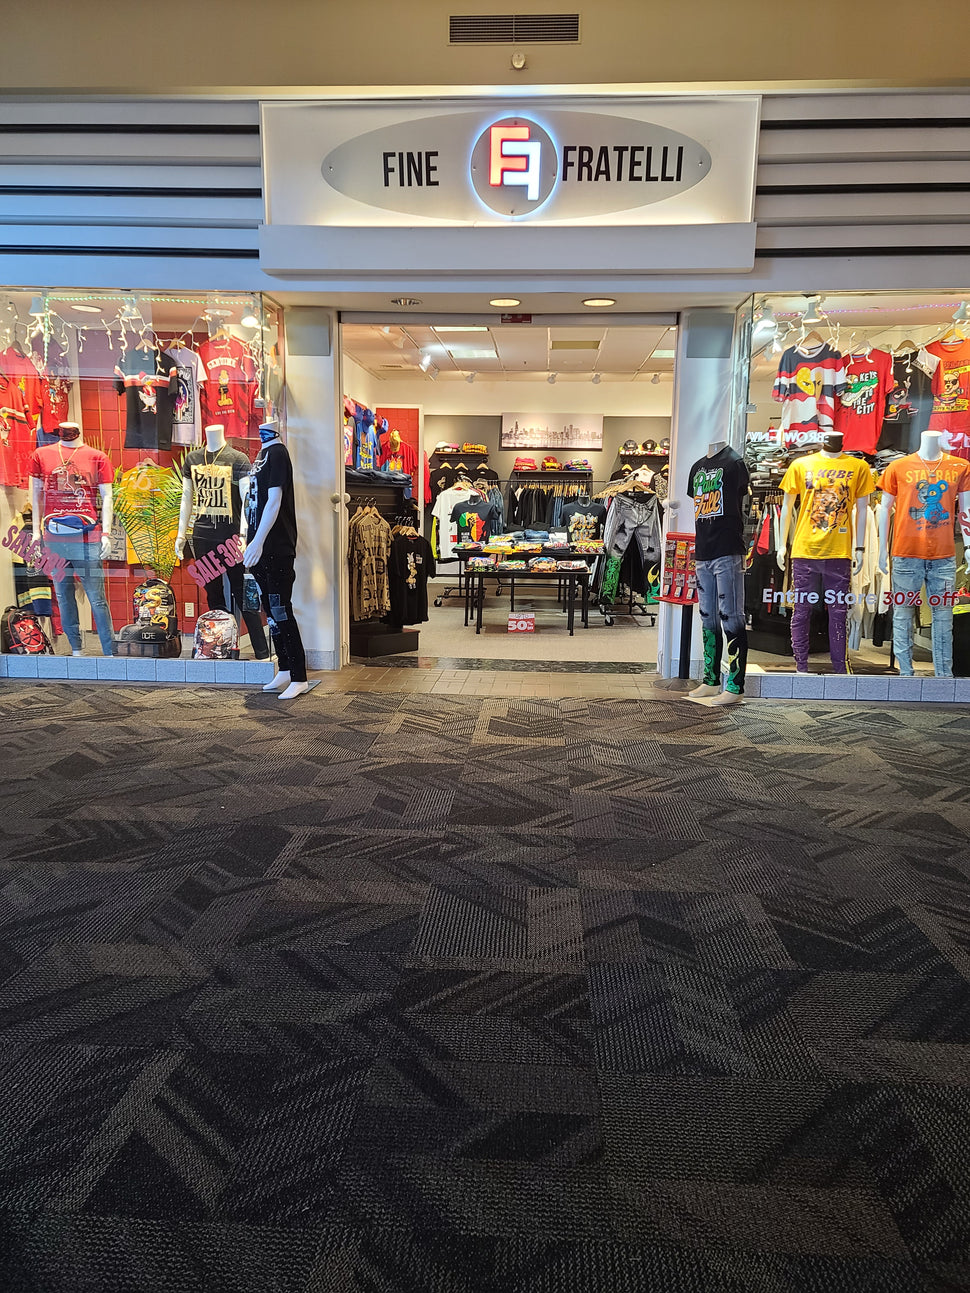 @finefratelli founded in the heart of Chicago. We focus on high-end quality street wear and apparel. We believe in dressing fine where we have been servicing our communities since 2019 We believe in treating our customers like family and hope to bring the